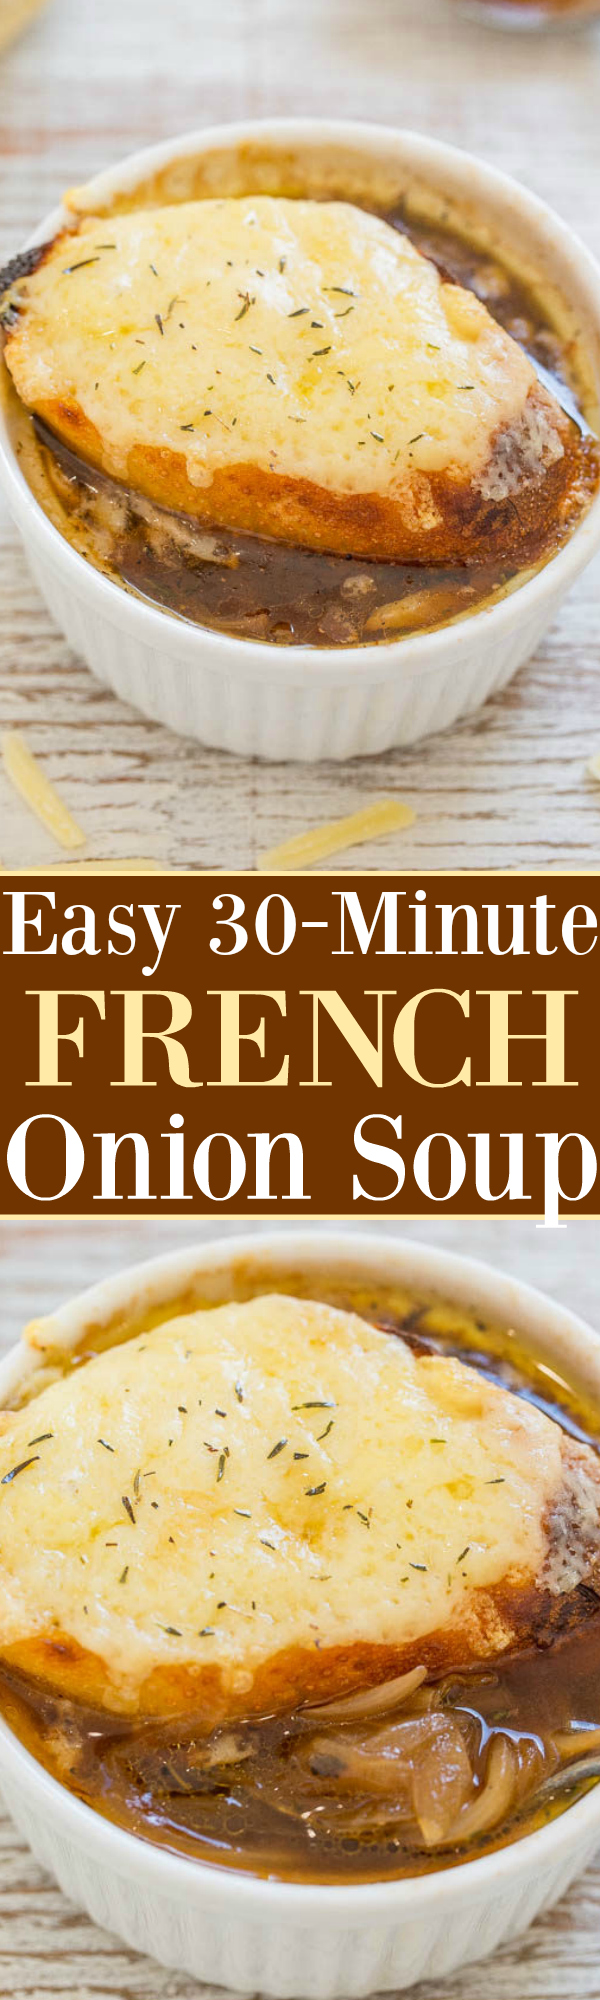 Two picture collage of french onion soup with graphic title